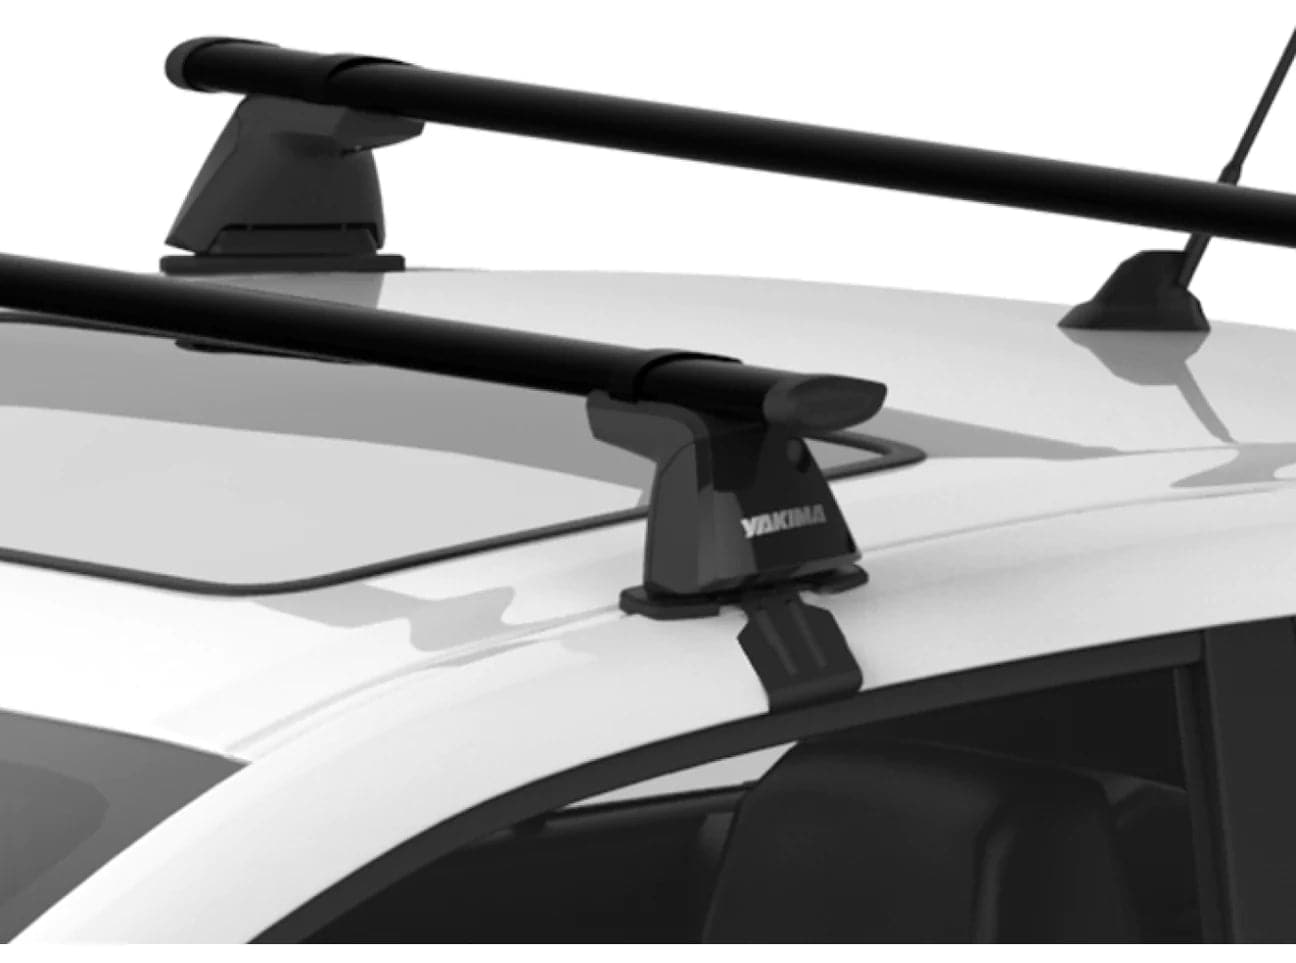 Featuring the Baseline Towers roof rack manufactured by Yakima shown here from one angle.